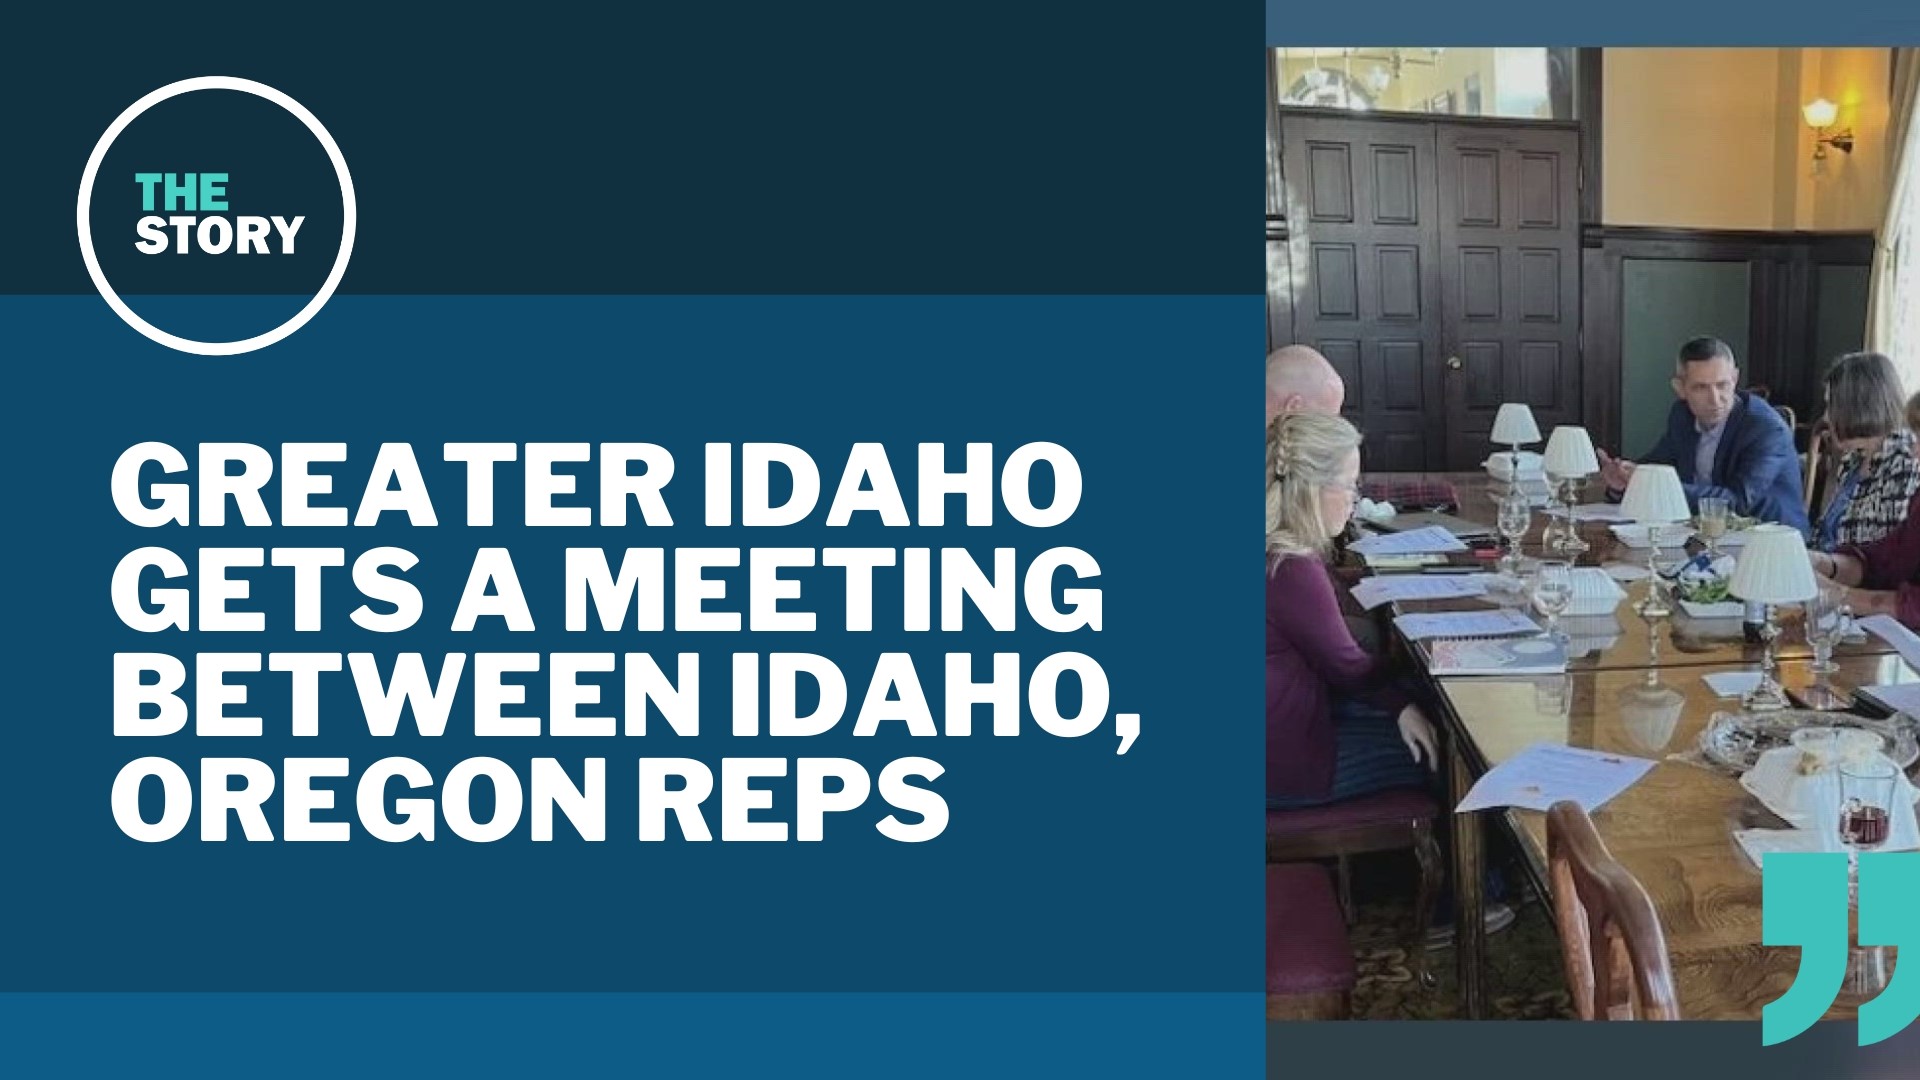 The former head of Oregon's House Republican caucus, Rep. Vikki Breese-Iverson, sat down to talk about Idaho annexing a dozen Oregon counties.